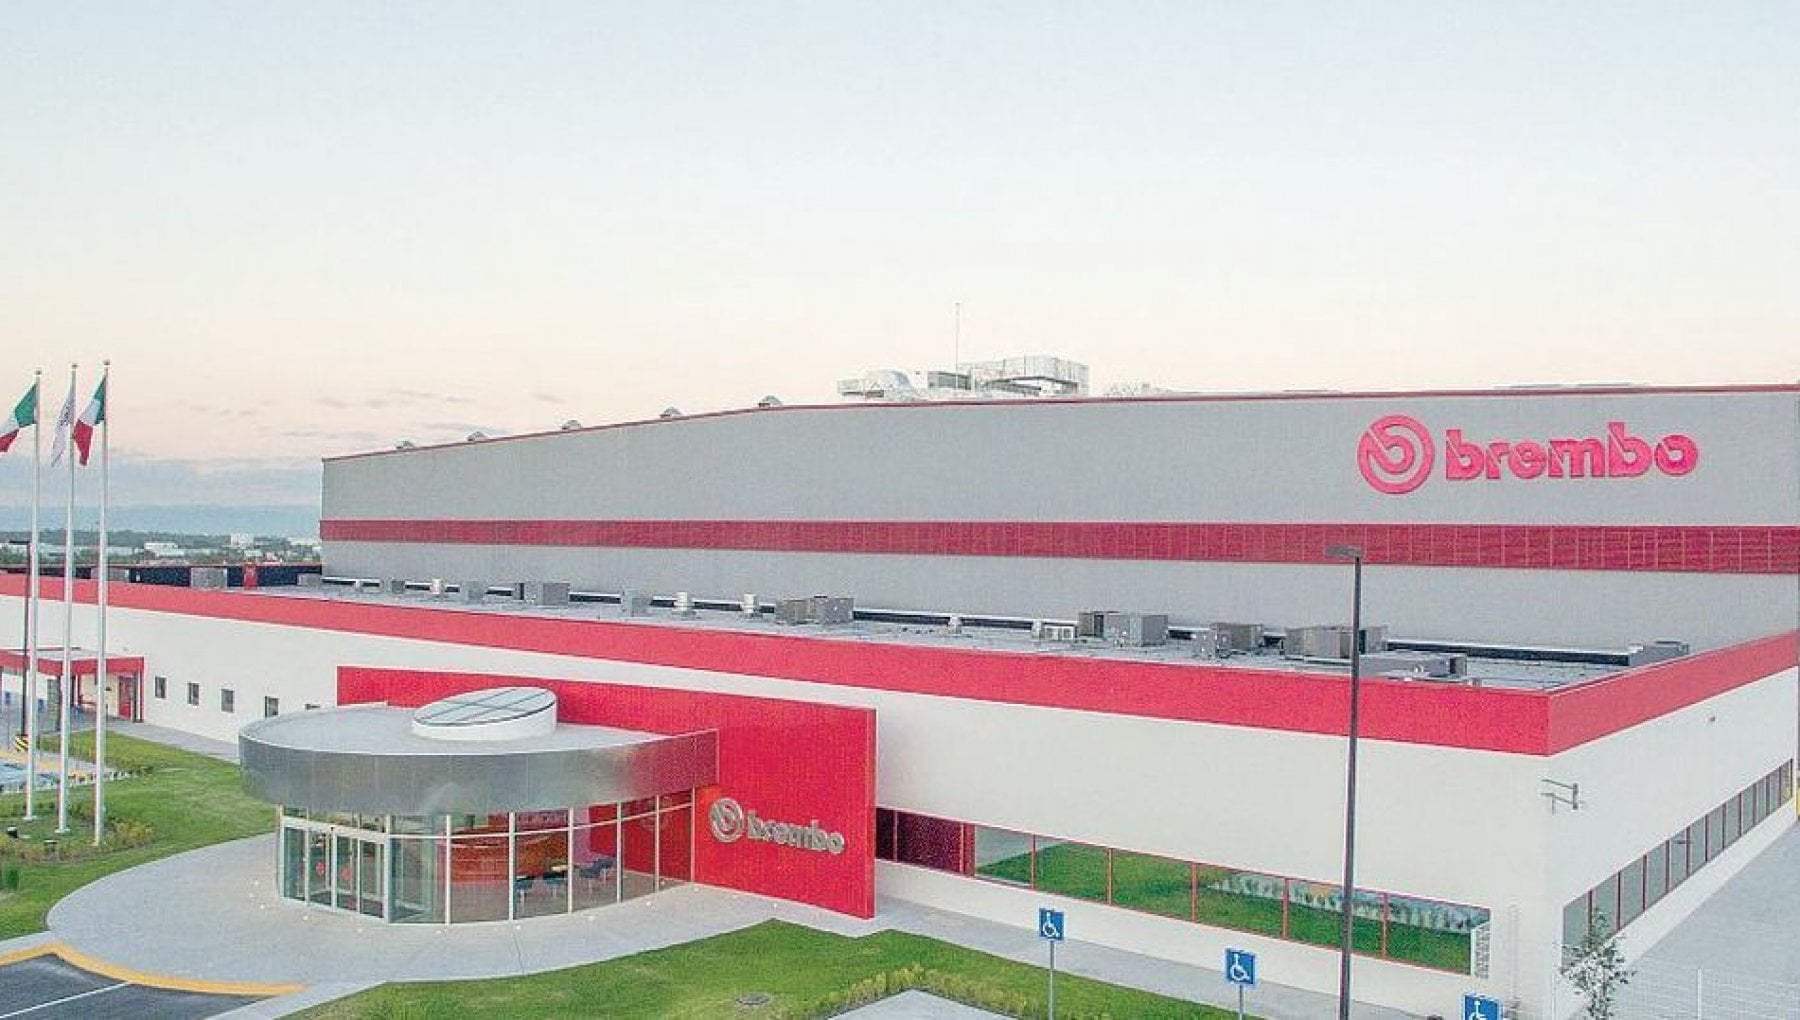 A view the manufacturing plant owned by Brembo